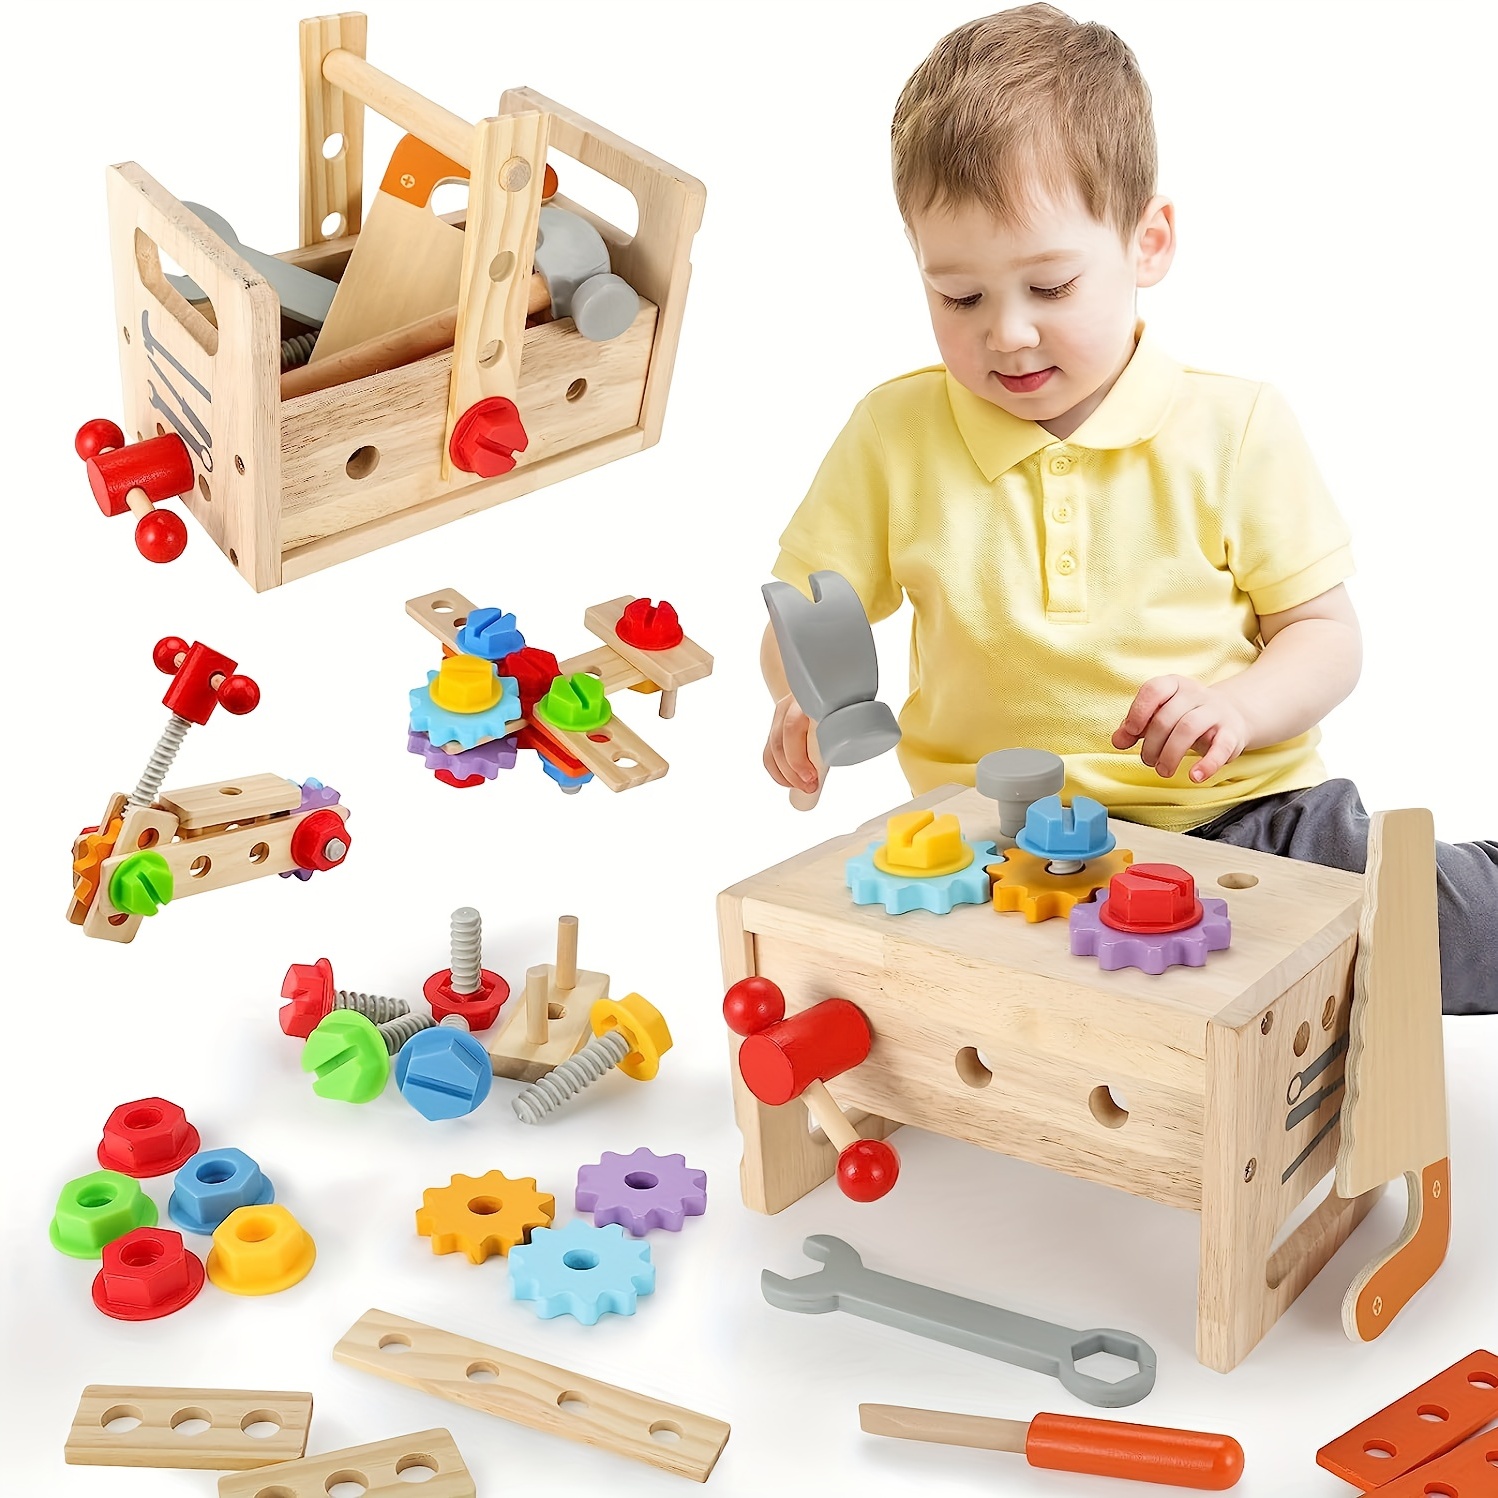 Montessori Mama Wooden Kids Tool Set - 29 Piece Pretend Play Construction Toy Tools Set - Stem Educational Toy - Toys for Kids Toddler Tool Set 